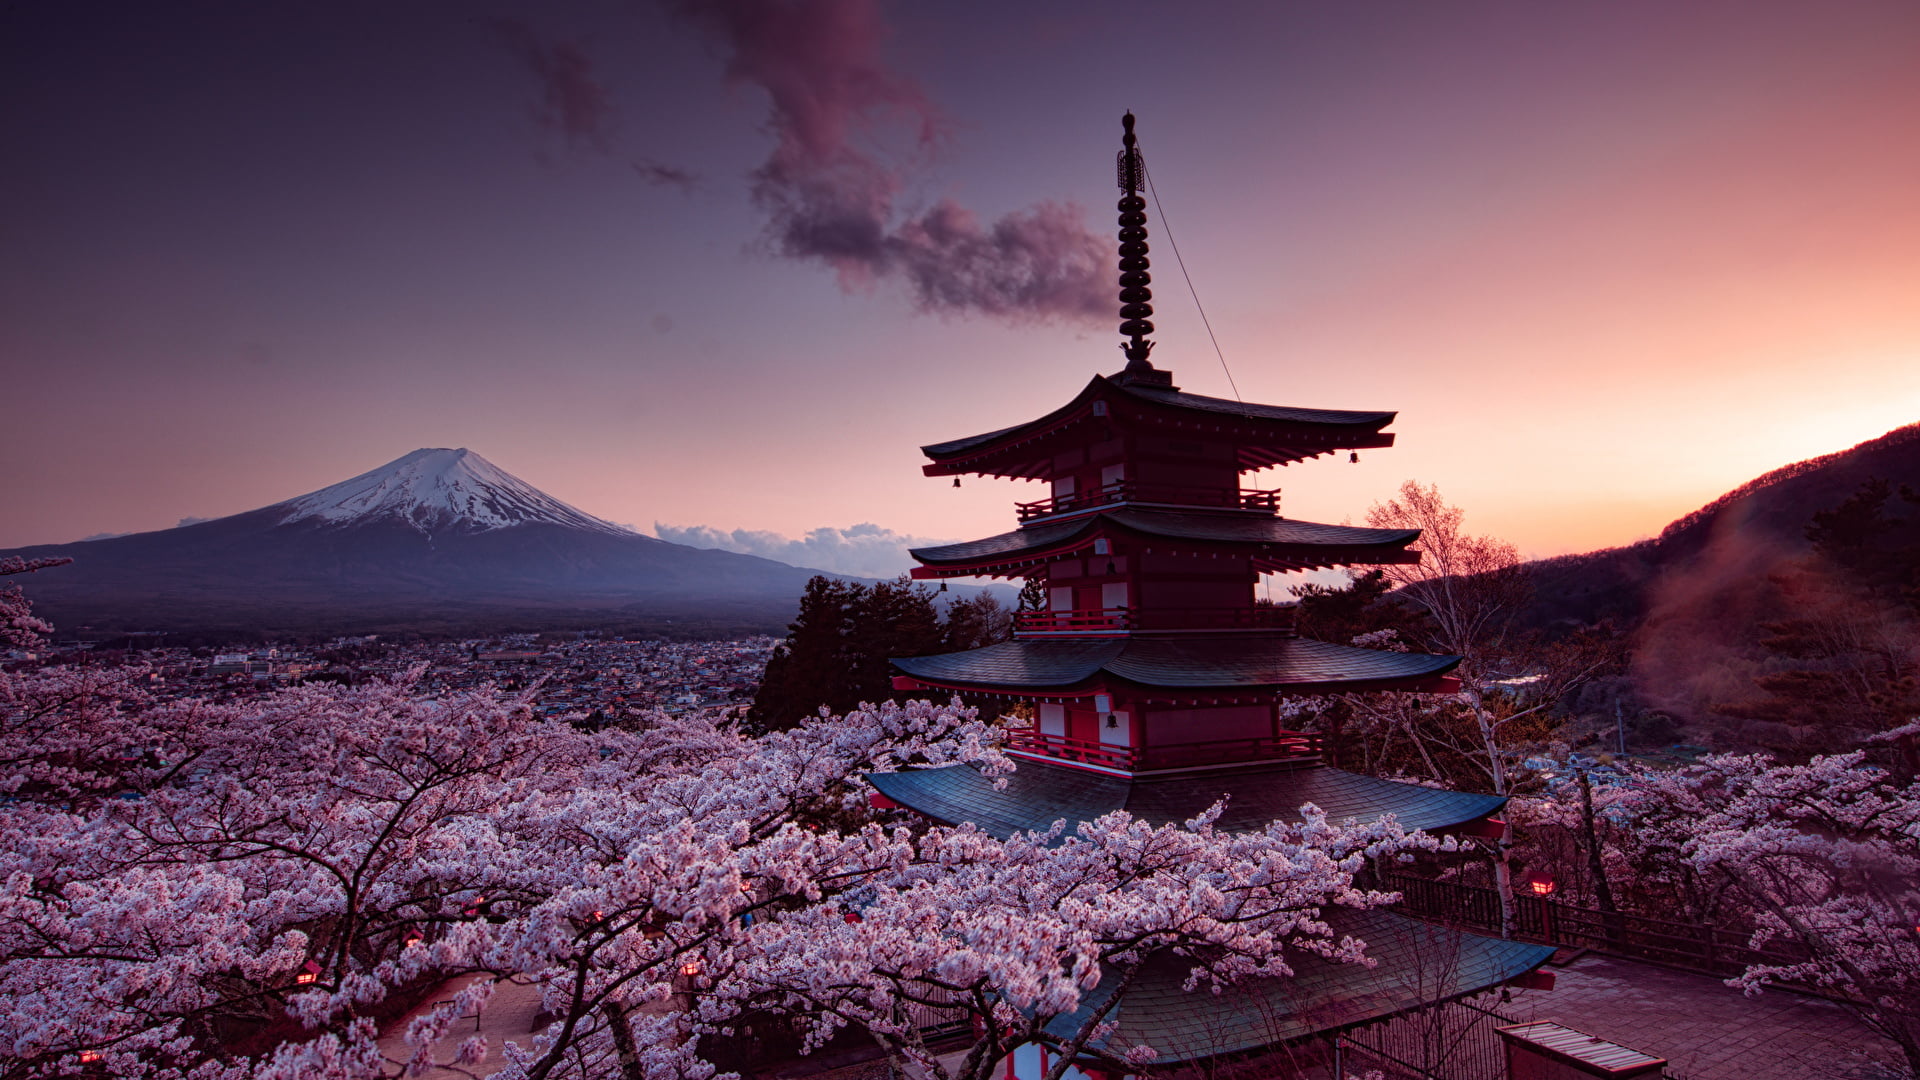 brown and white pagoda, Mount Fuji, Japan, cherry blossom, pink